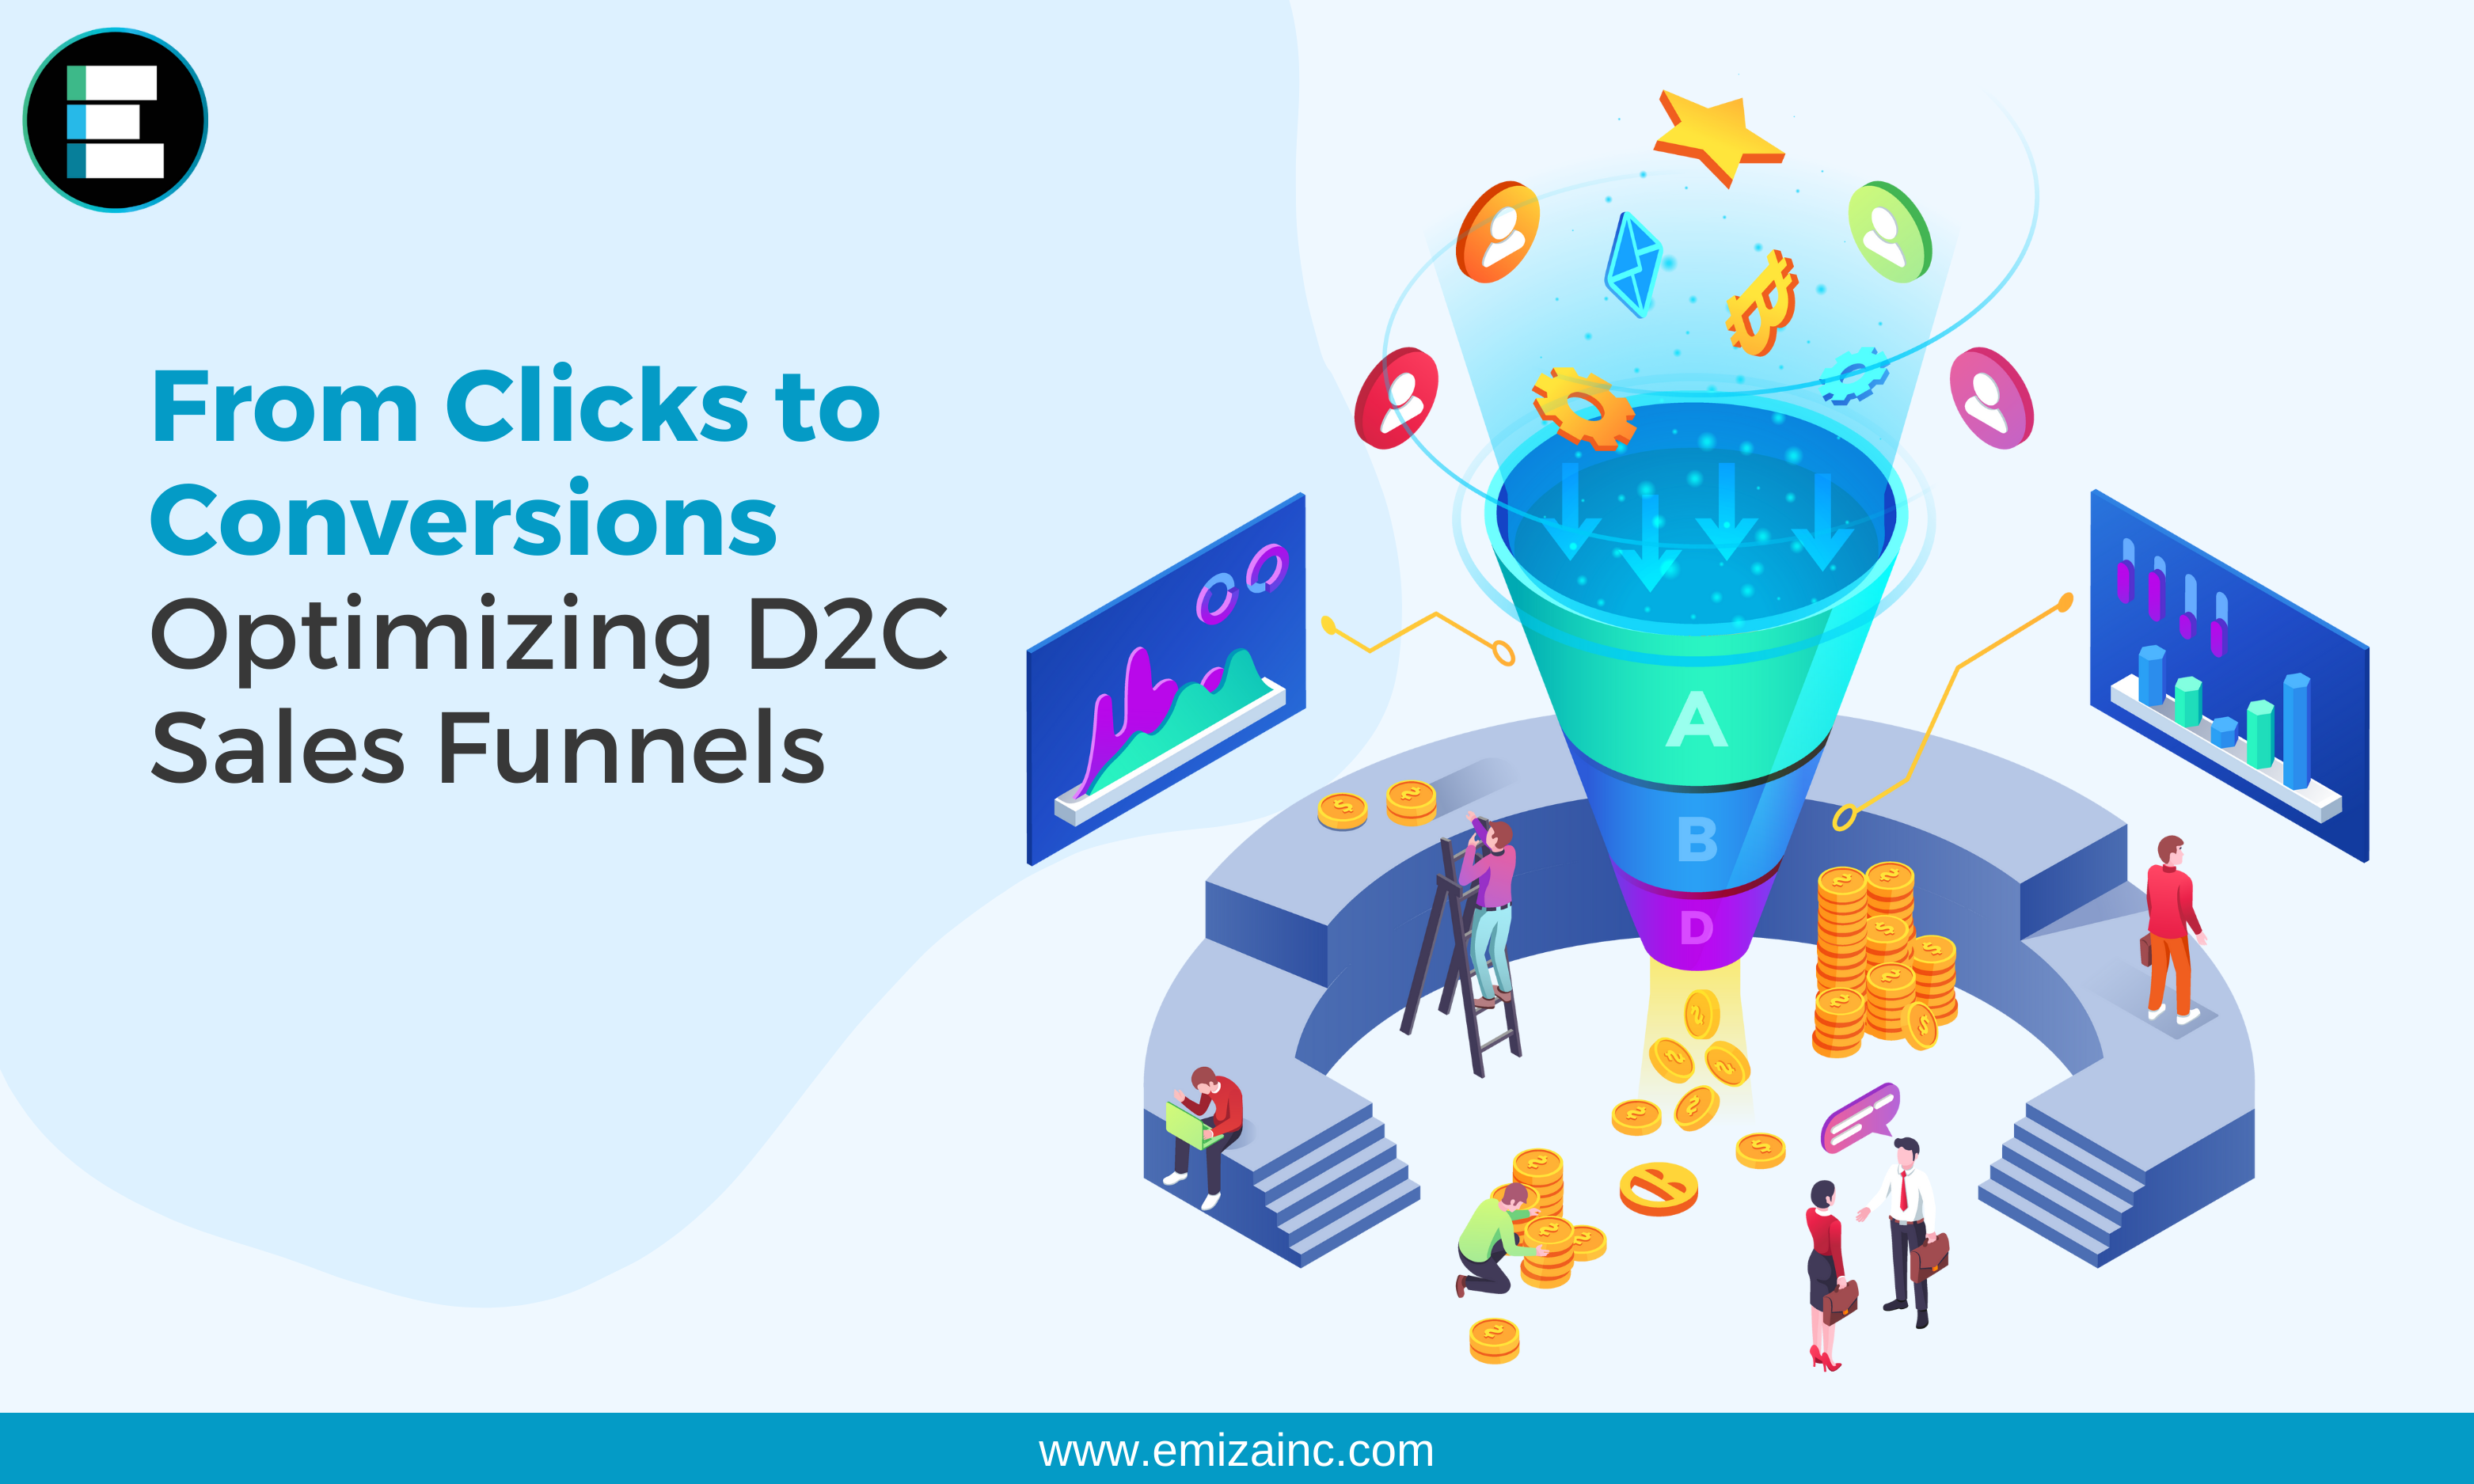 From Clicks to Conversions: Optimizing D2C Sales Funnels